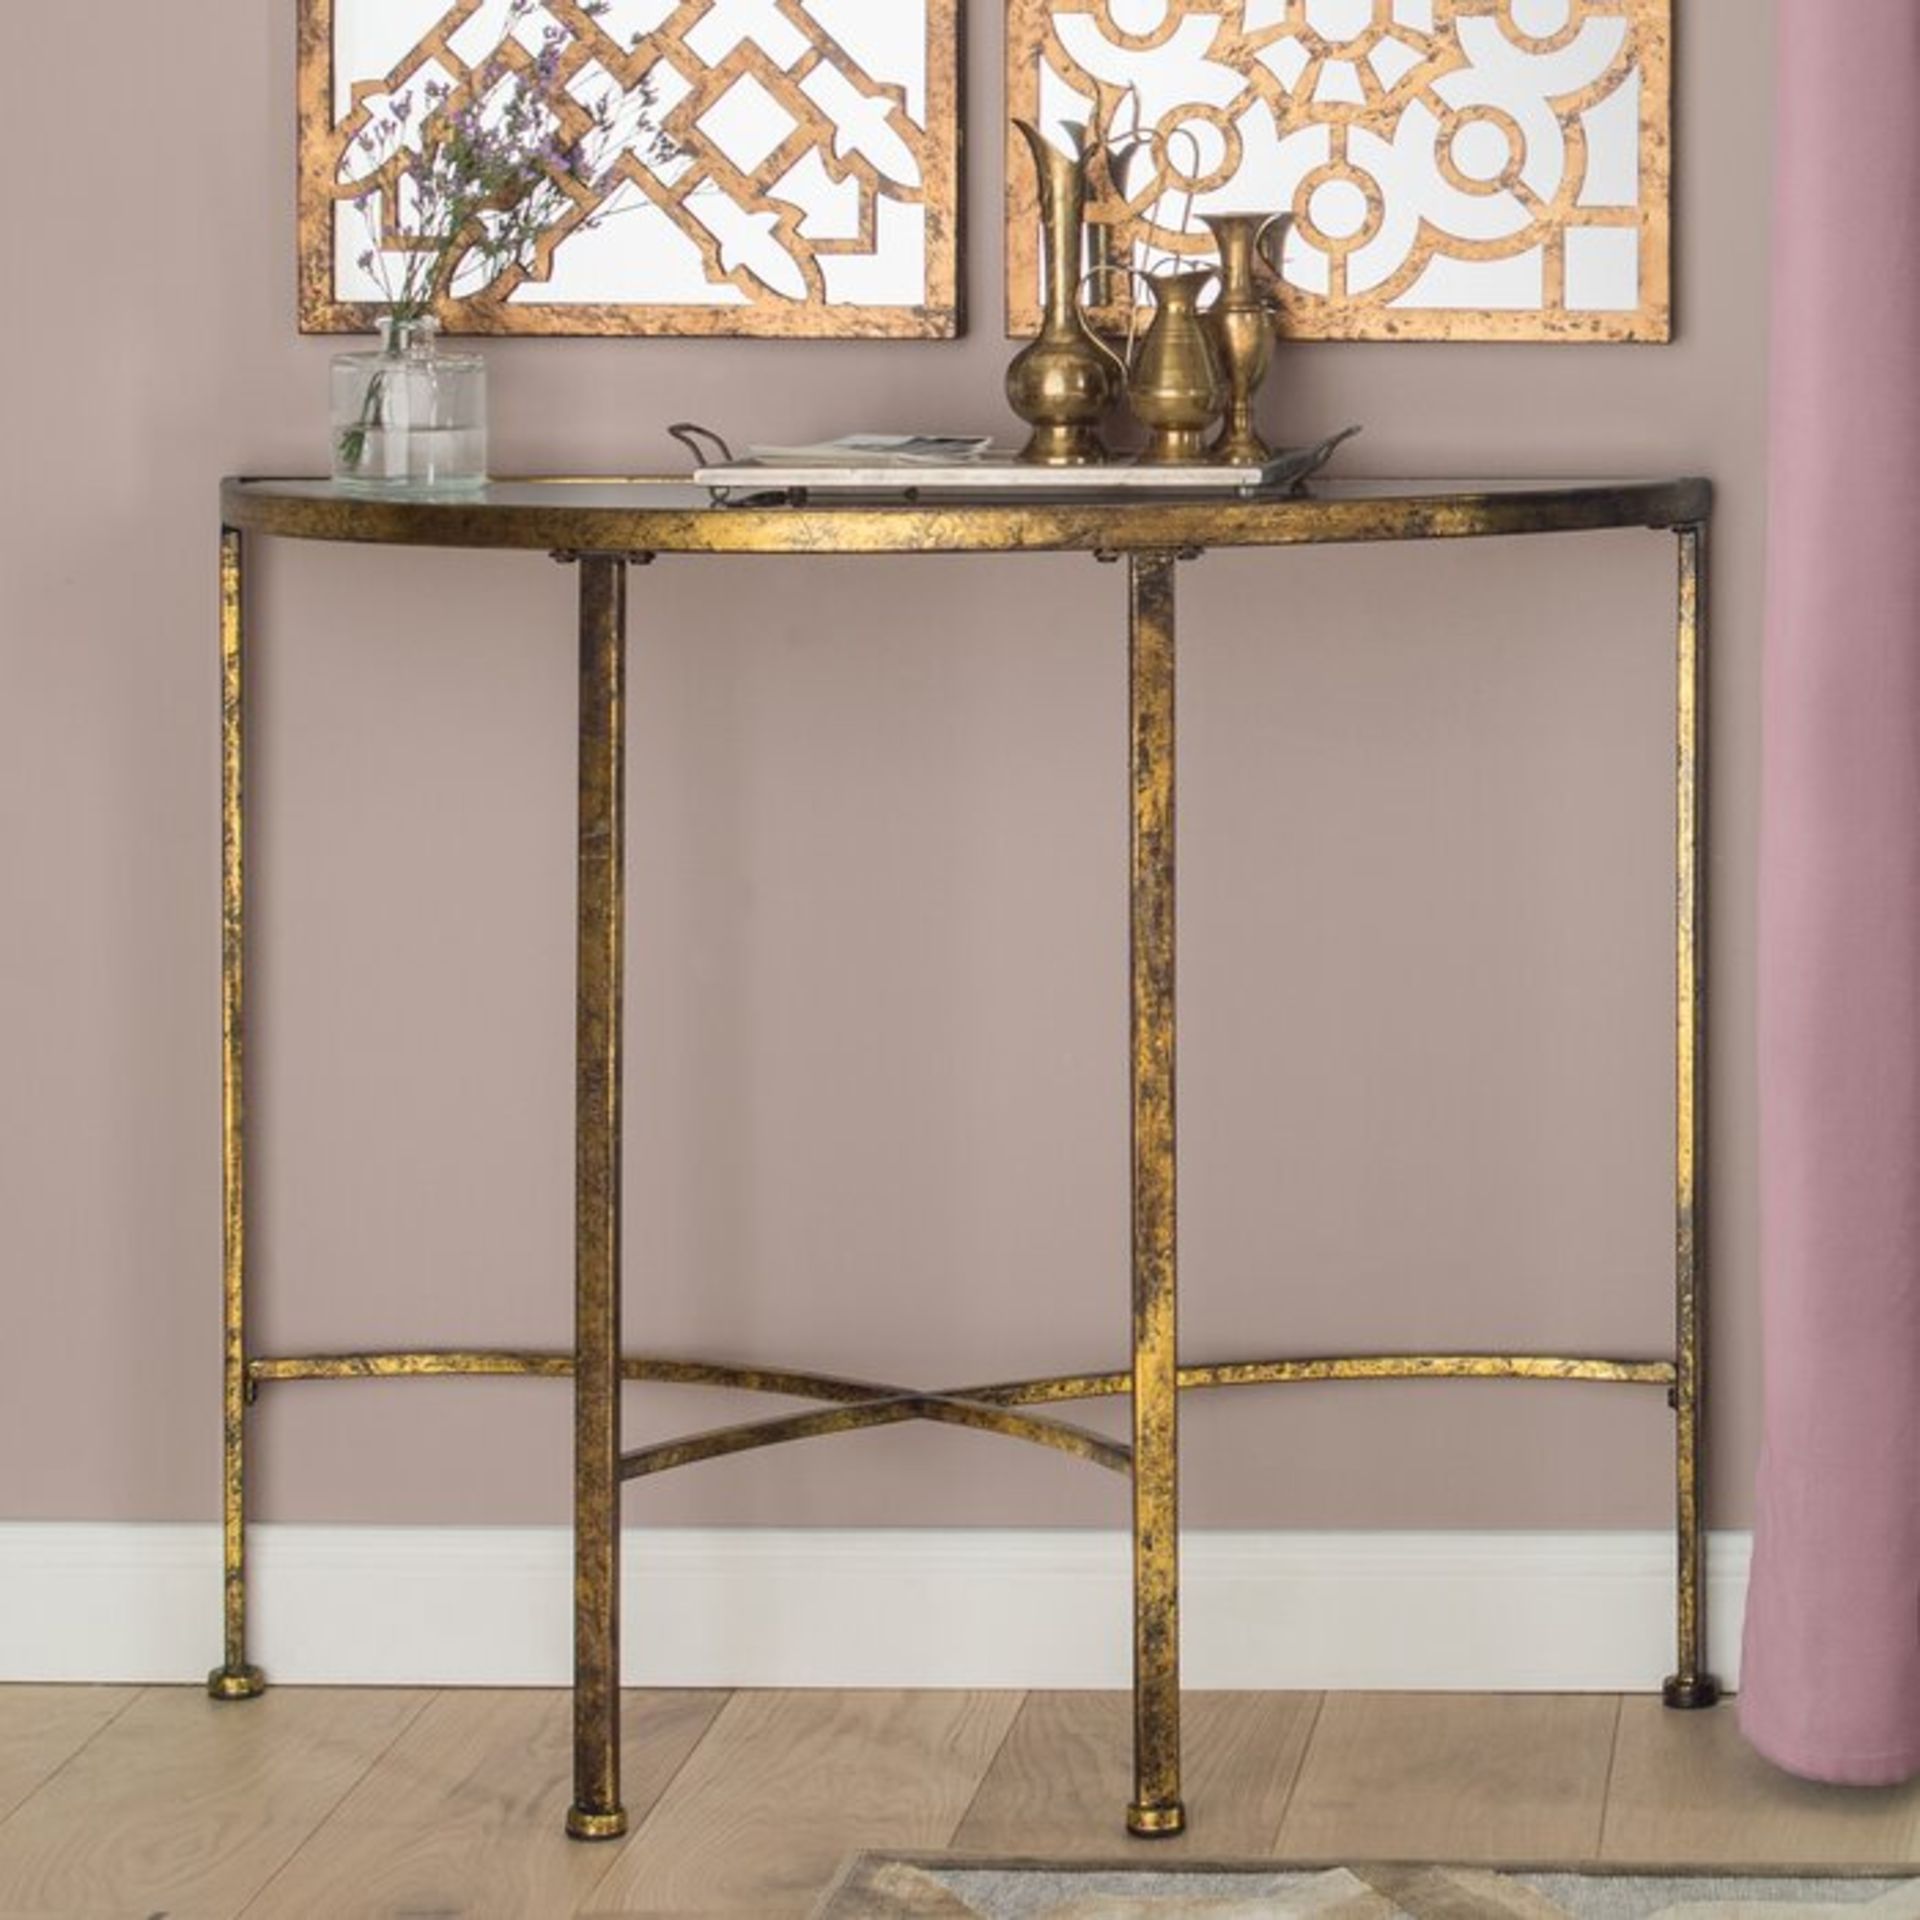 Balam Console Table - RRP £194.99 - Image 2 of 2